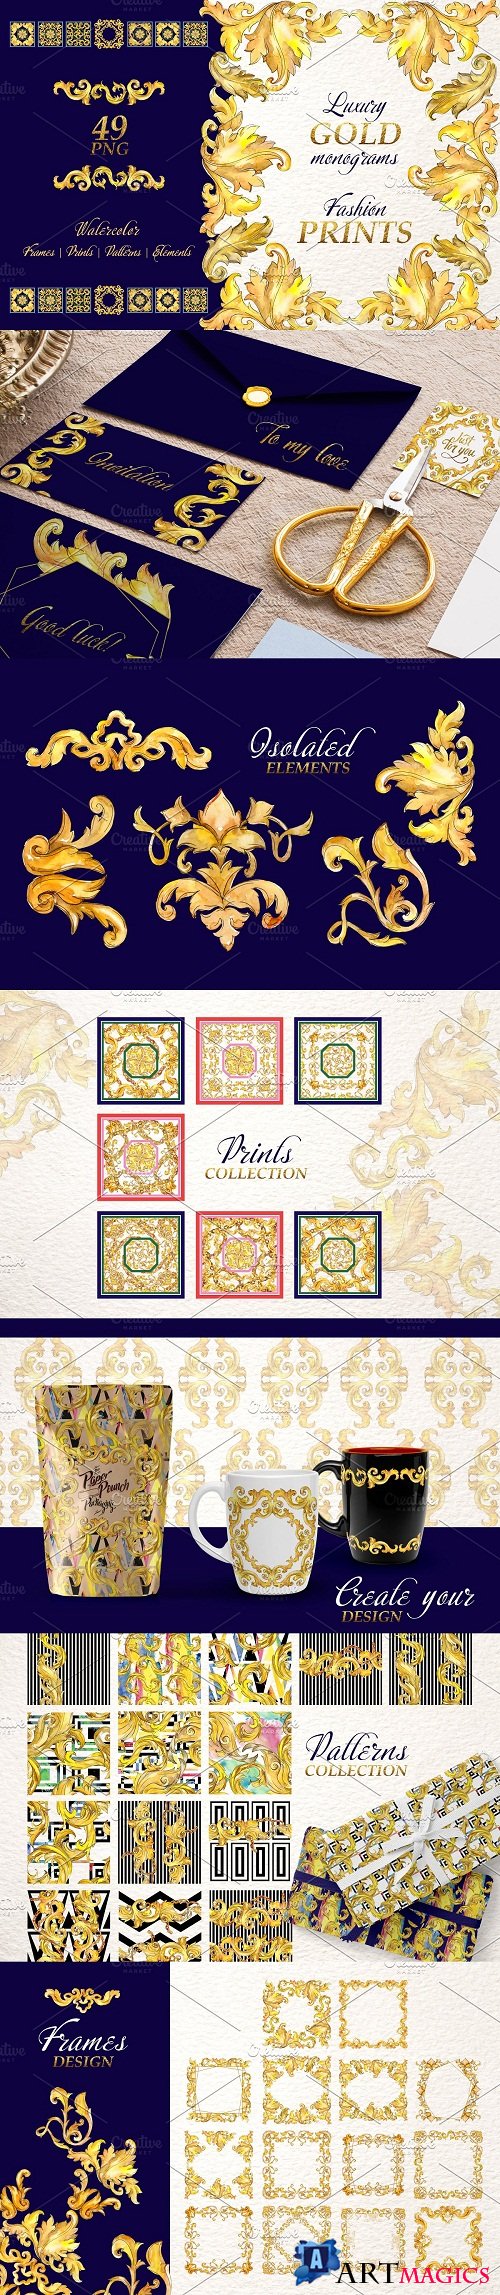 Luxury gold monograms Watercolor png - 3554086